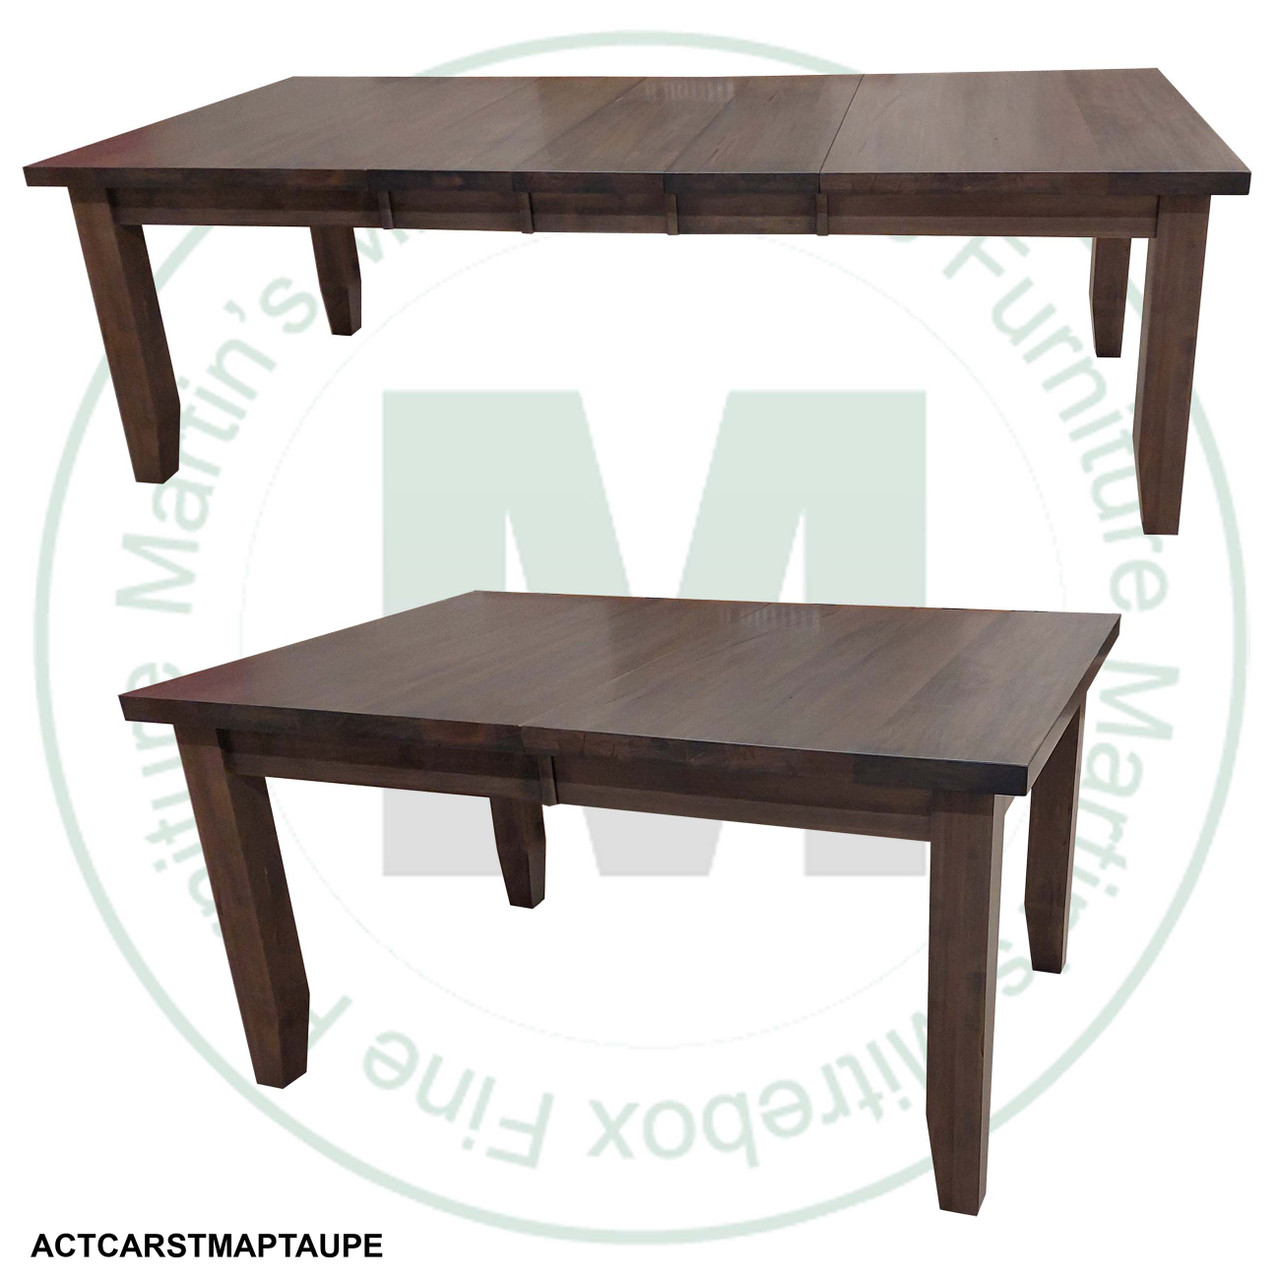 Oak Mansfield Extension Harvest Table 36''D x 60''W x 30''H With 3 - 12'' Leaves